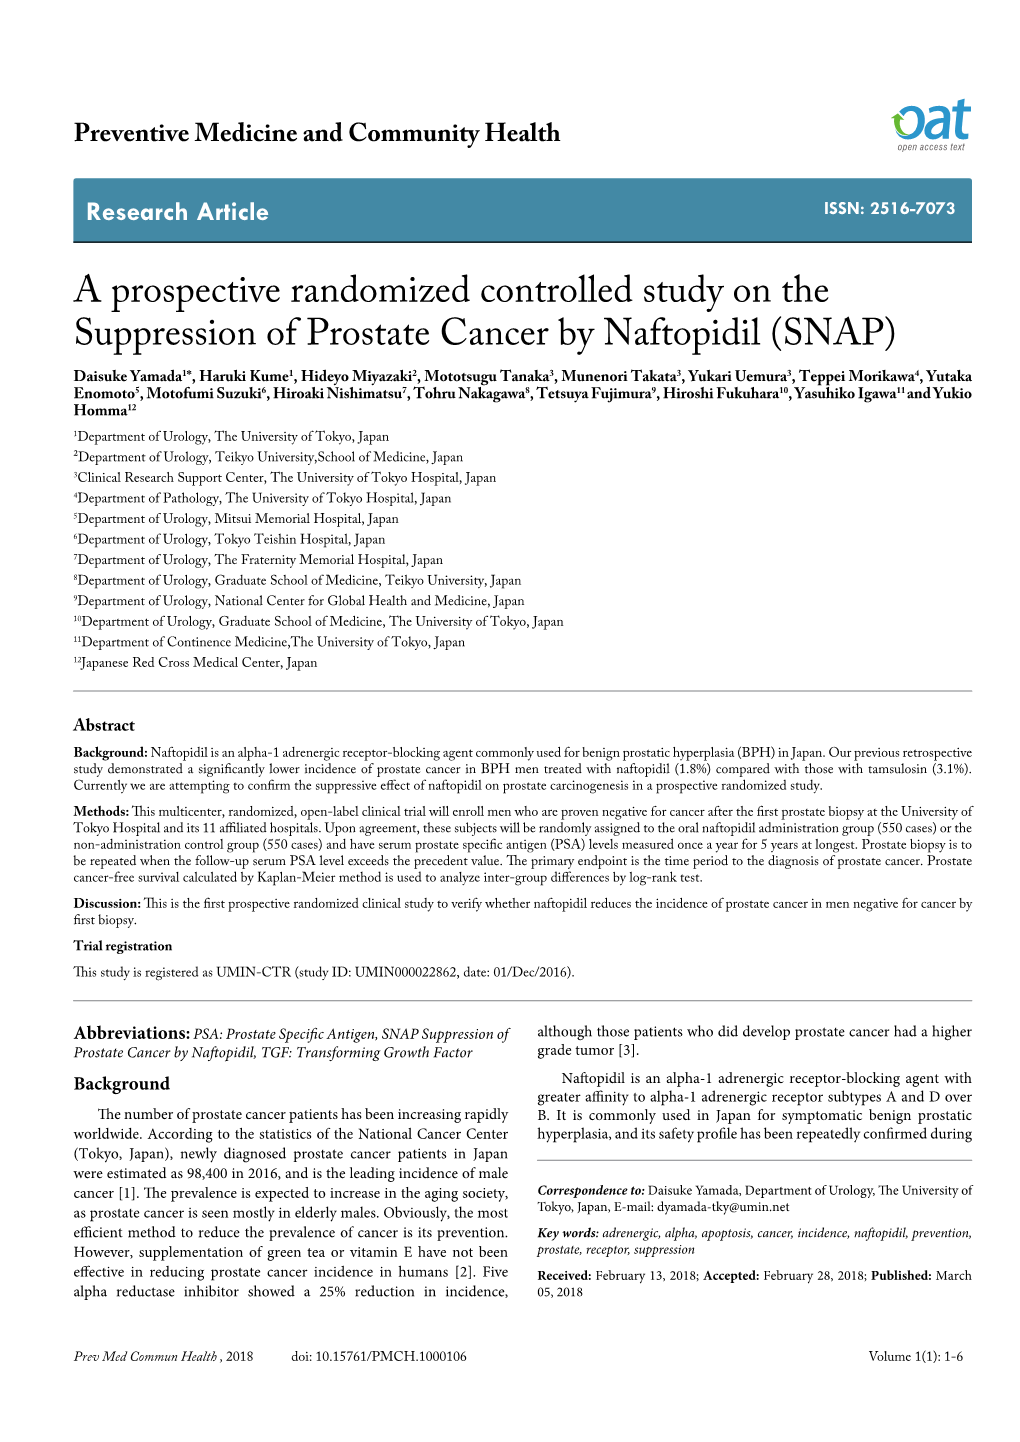 A Prospective Randomized Controlled Study on the Suppression of Prostate Cancer by Naftopidil (SNAP)